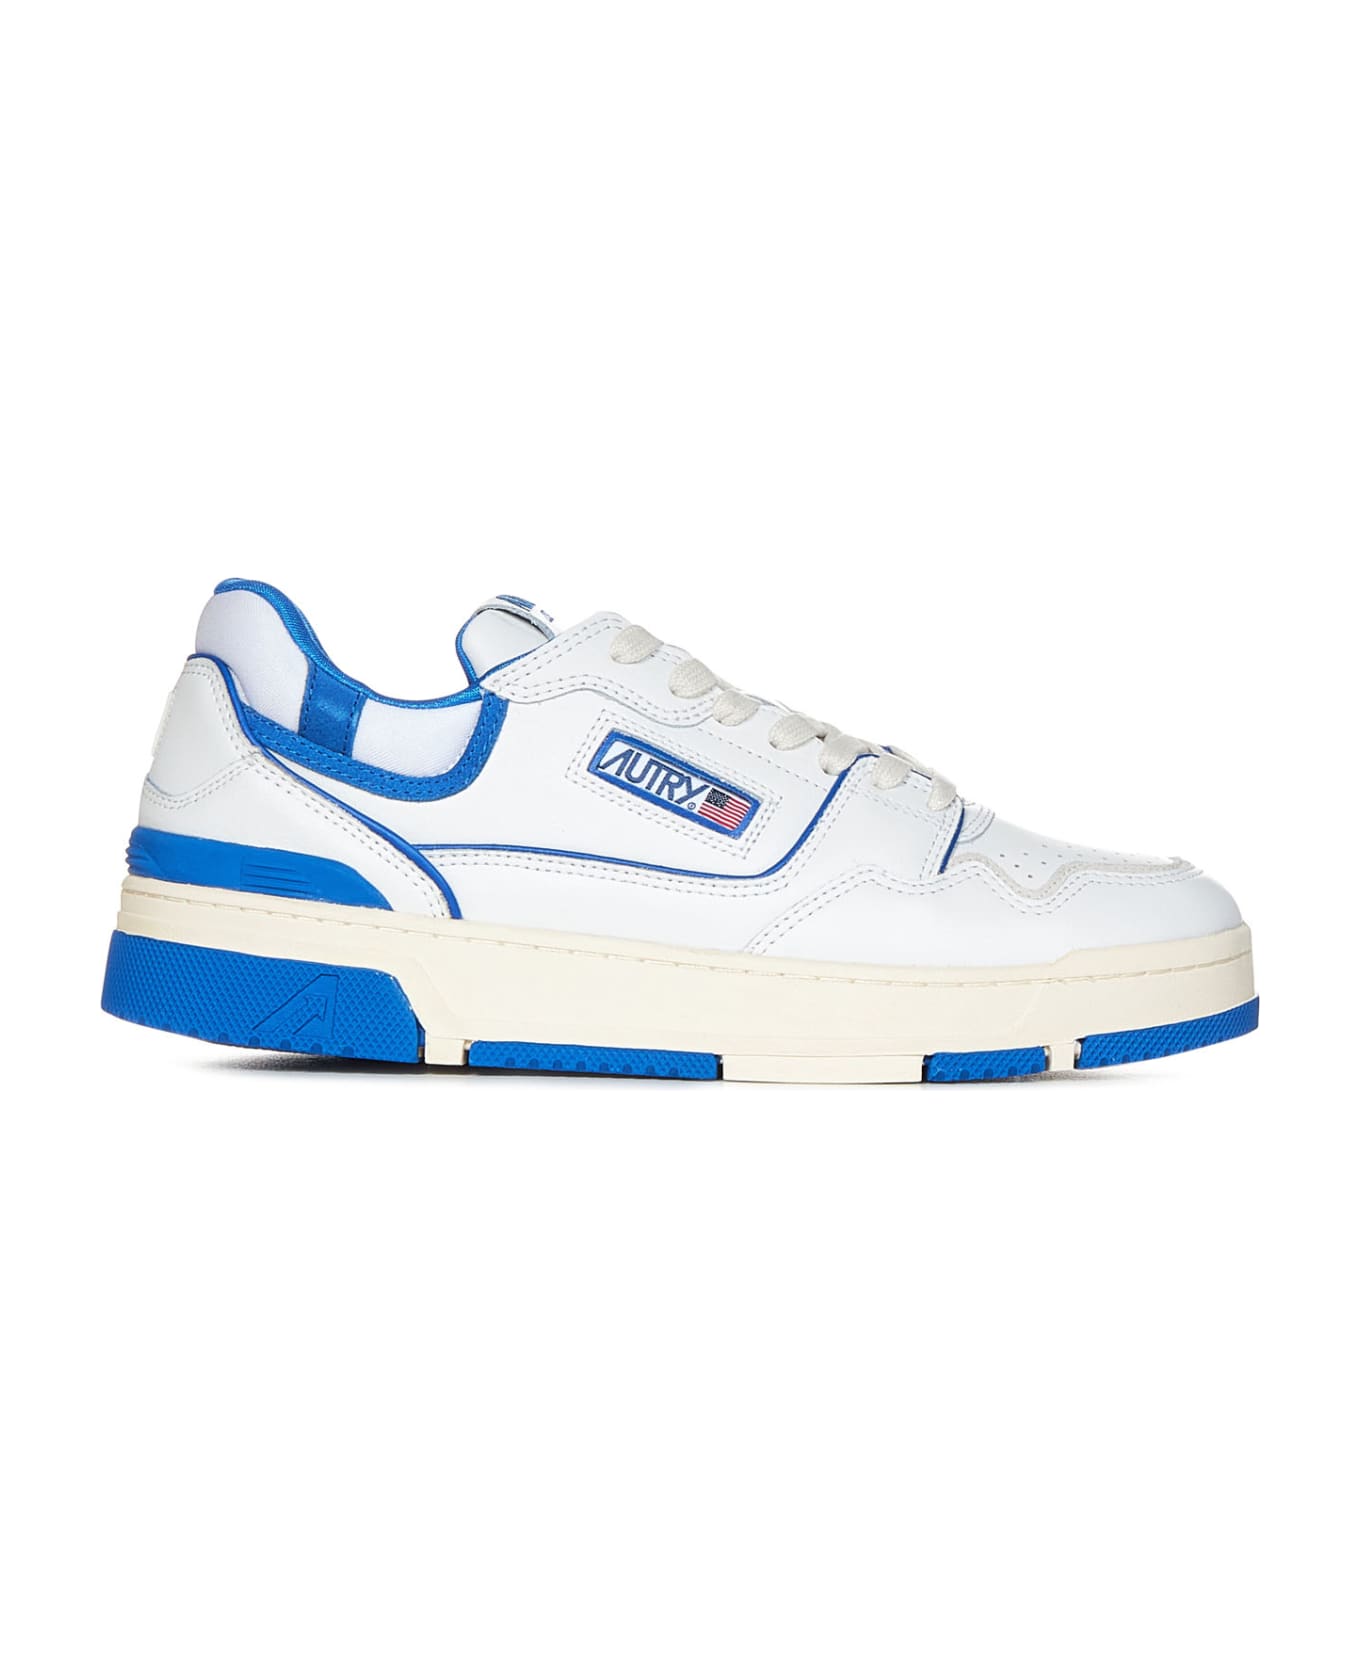 Autry Rookie Clc Low Sneakers - White スニーカー